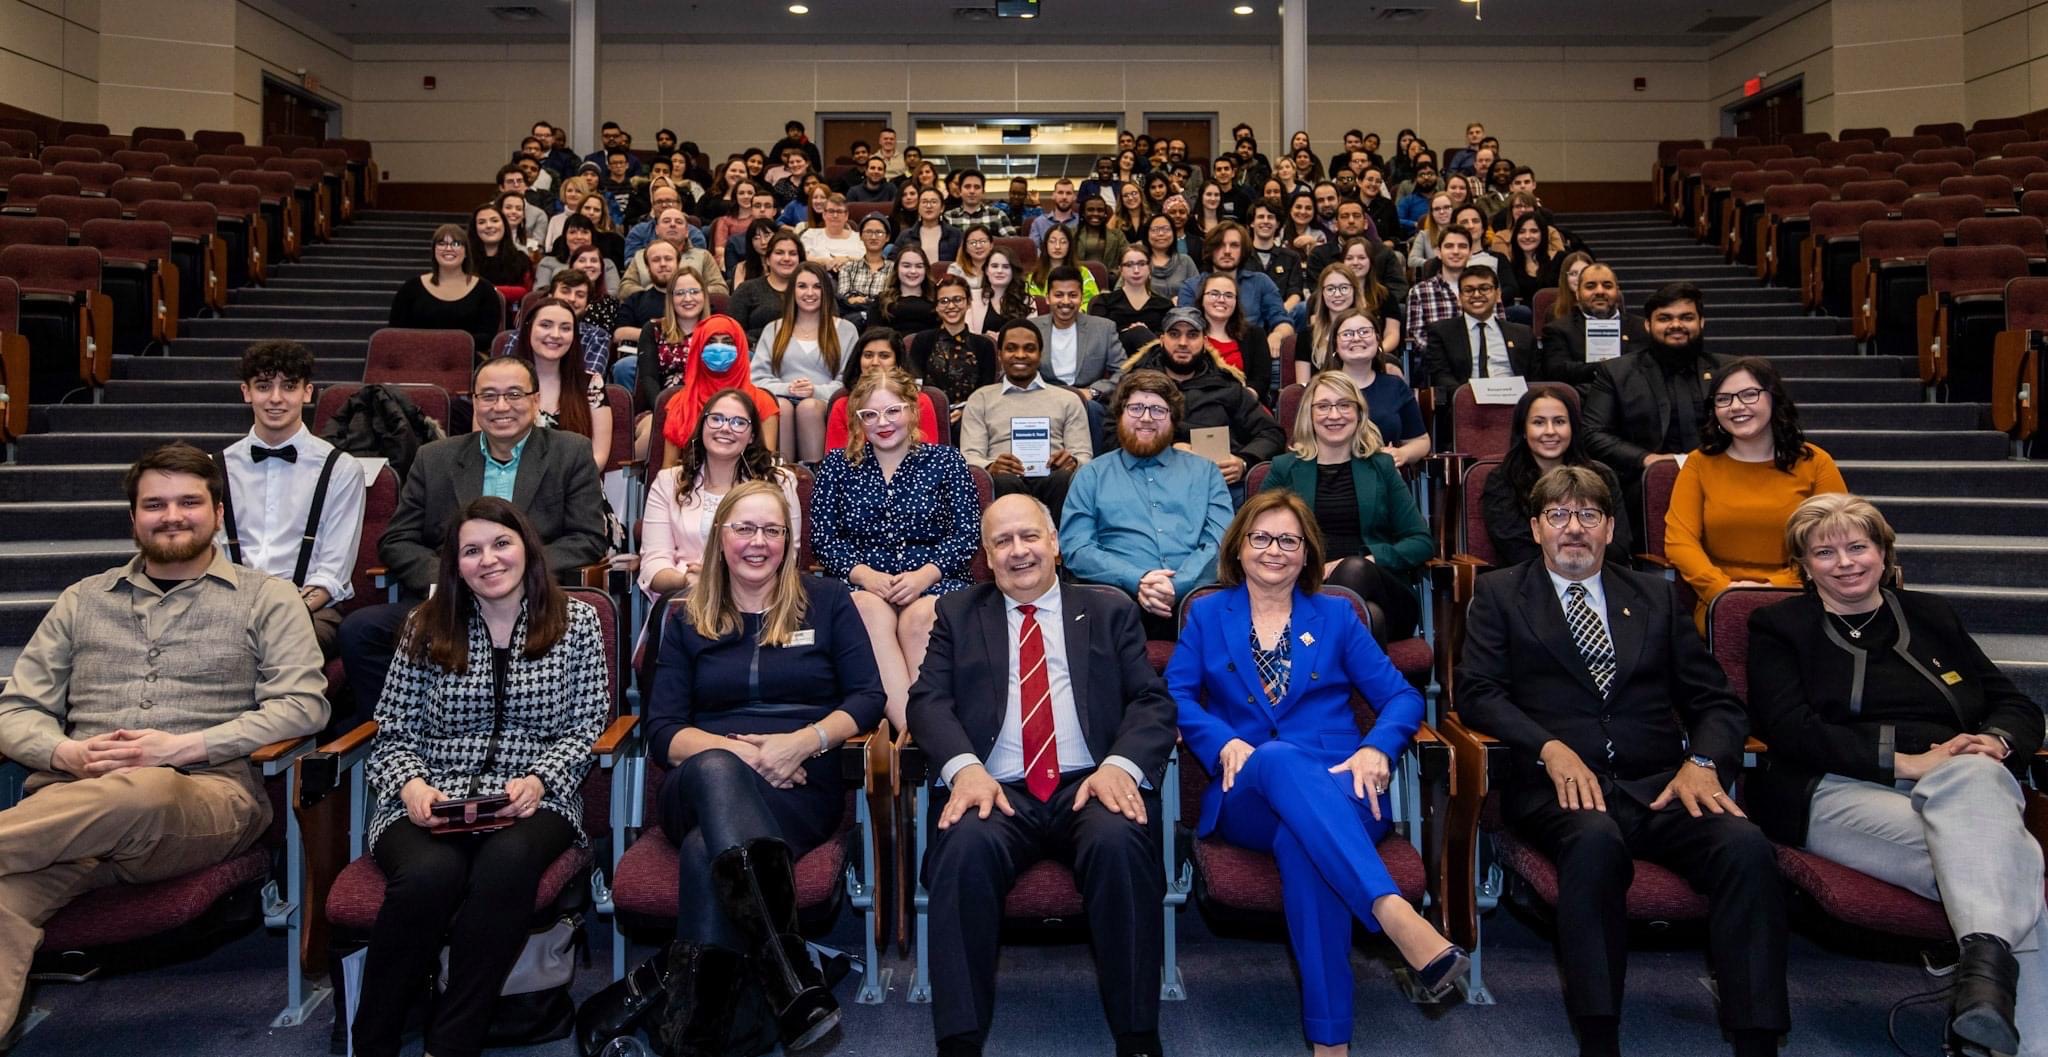 An image of award-winning students and invited guests sitting together in a lecture hall at the 2019 VIP Awards Ceremony.